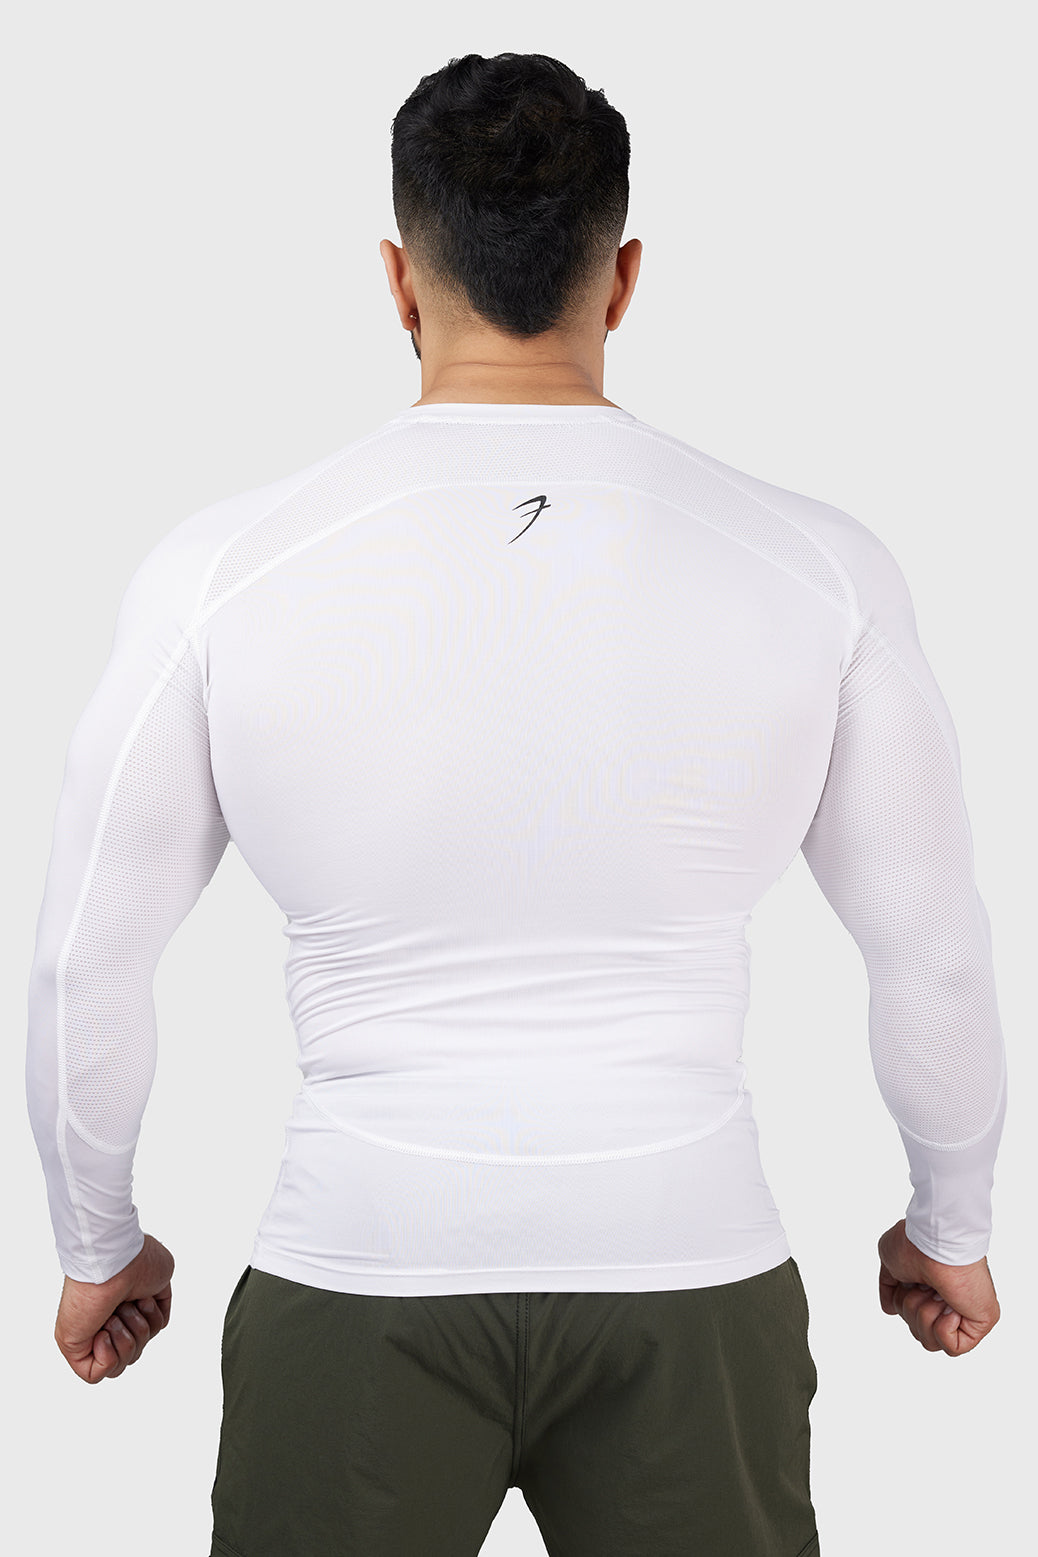 Compression 2.0 Full Sleeves T-shirt White